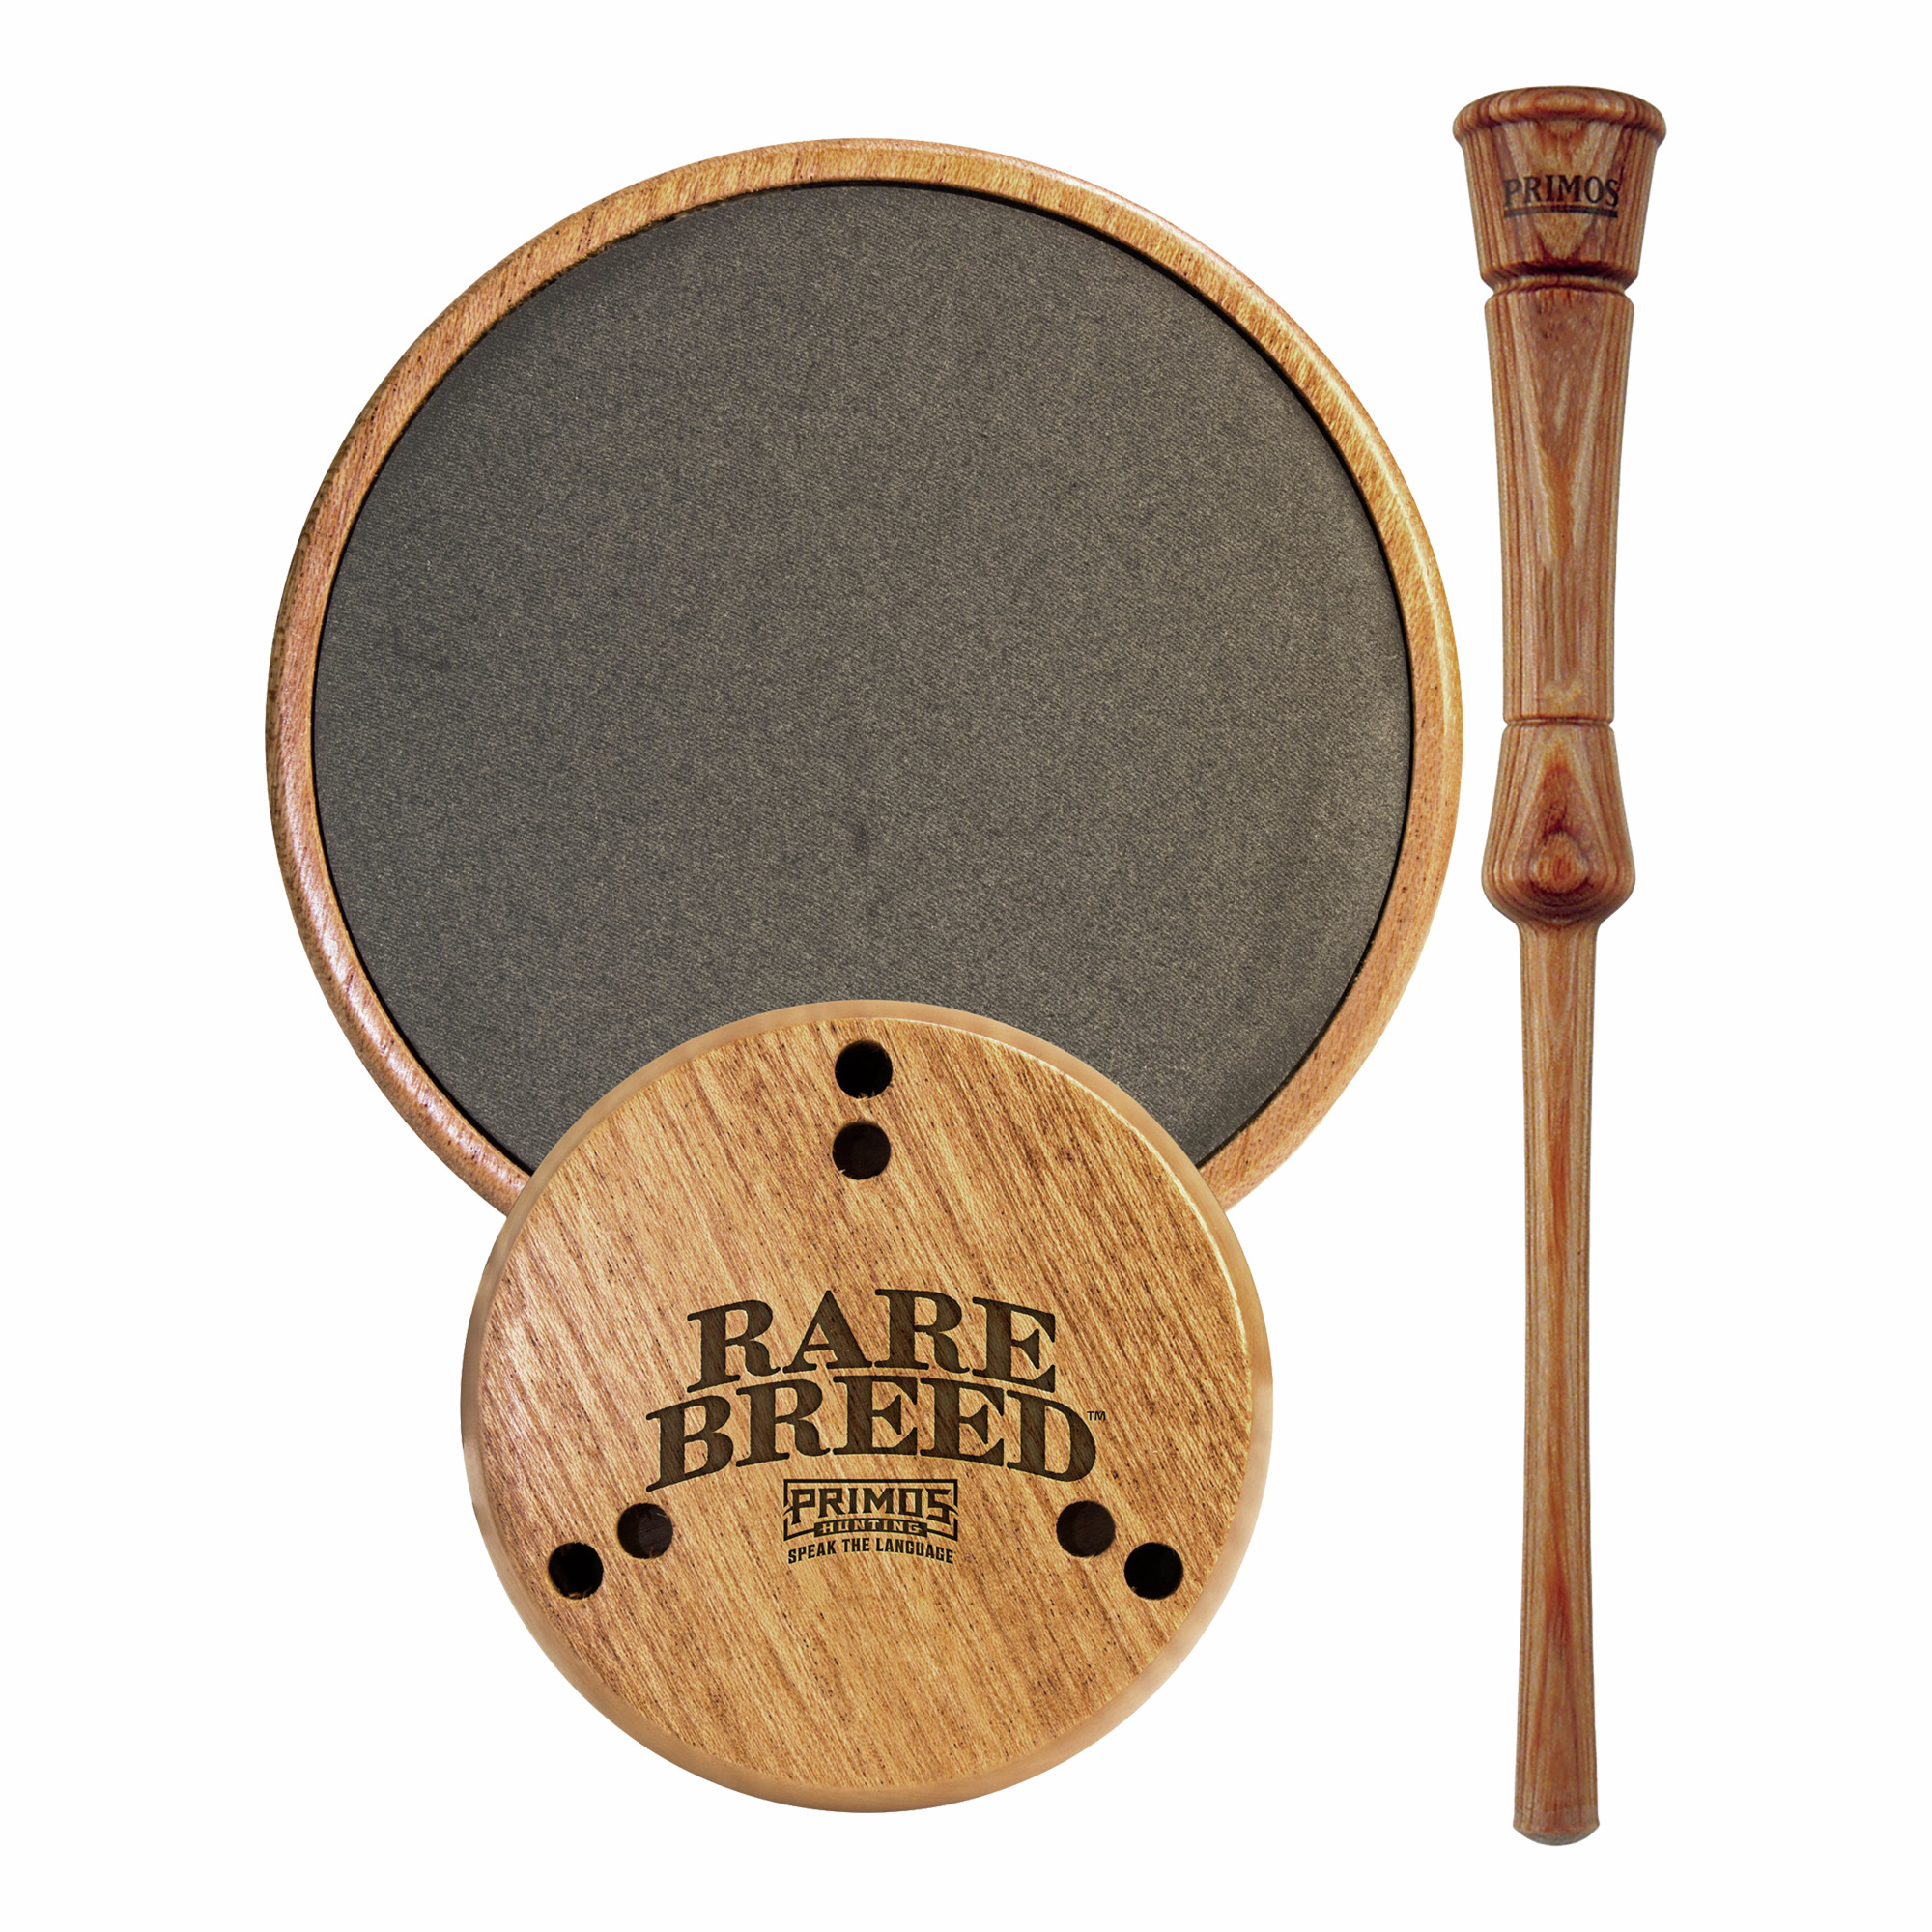 Primos A-frame Triple With Bat Cut Turkey Call 1186 for sale online 